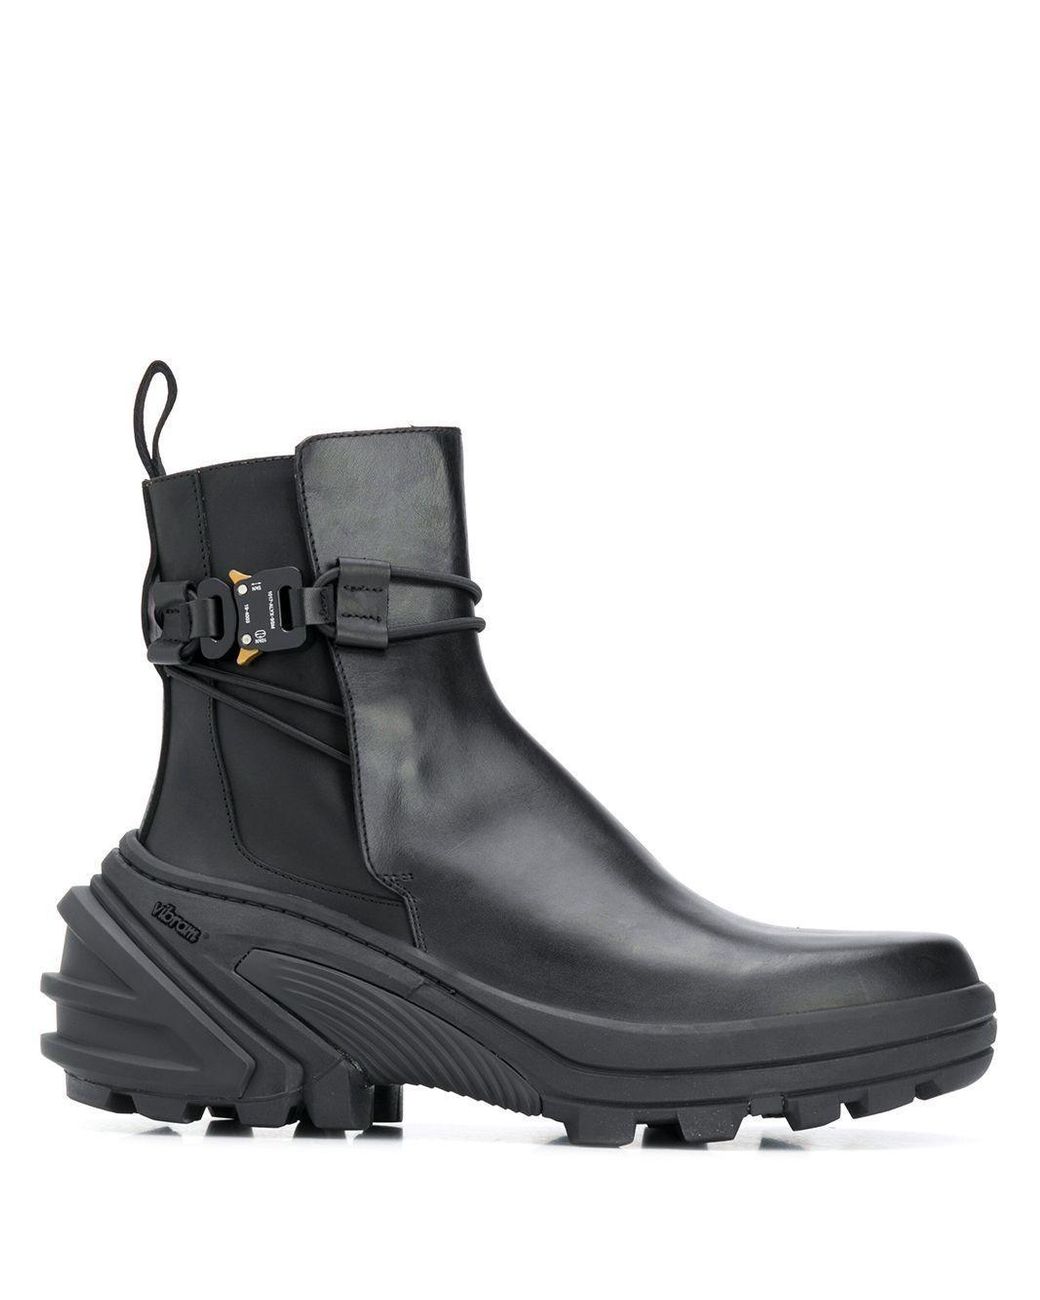 1017 ALYX 9SM Buckle Leather Ankle Boots in Black for Men - Lyst